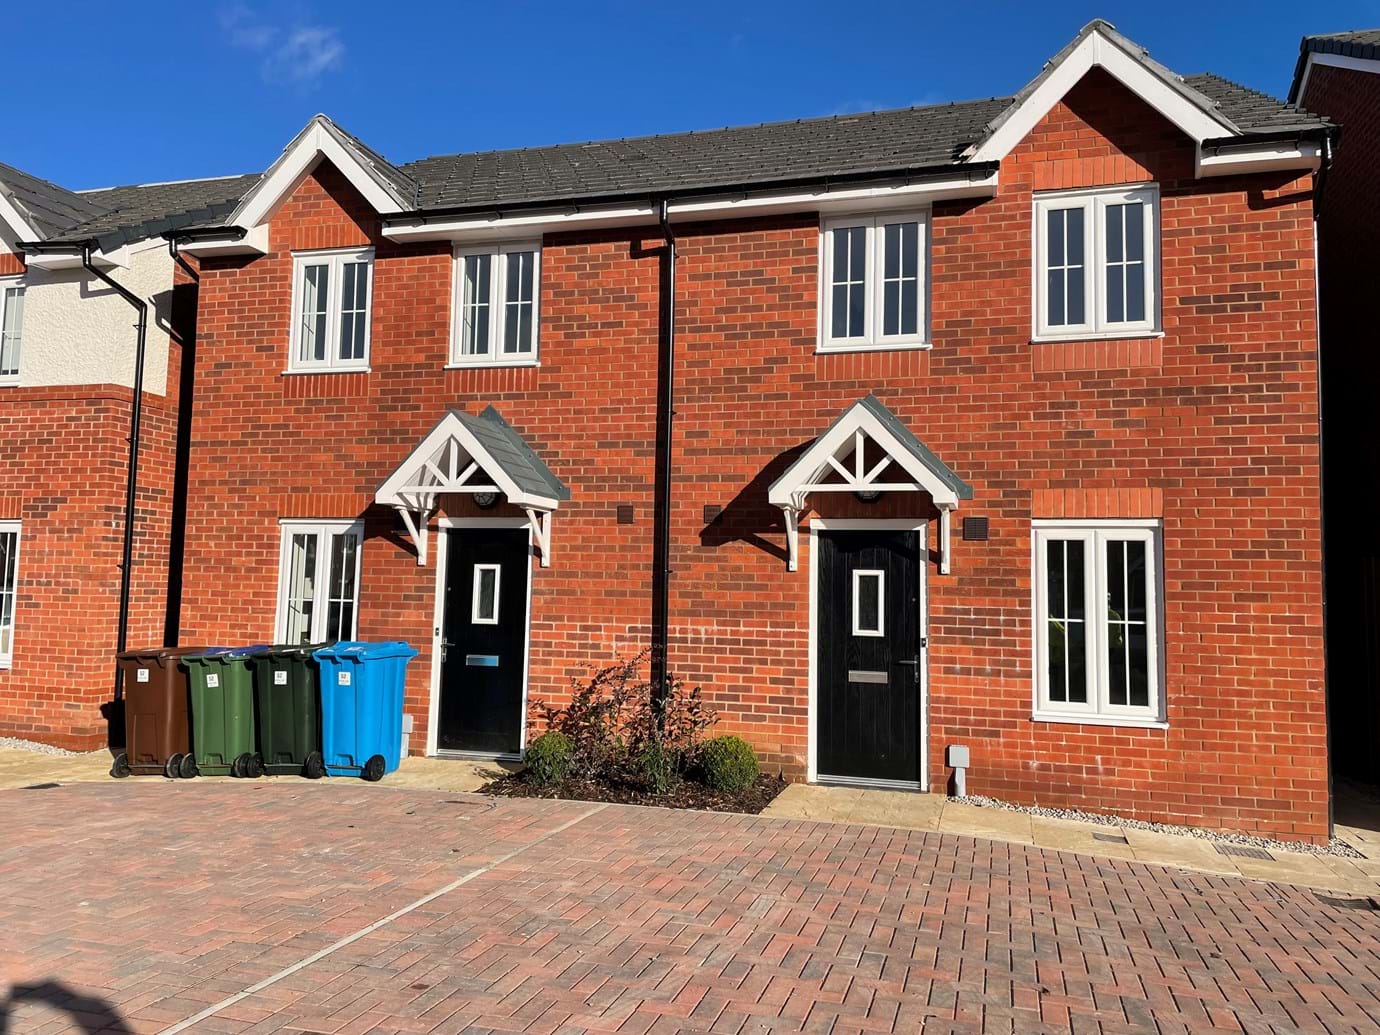 Two new homes for affordable rent at our Boothroyden Rd development in Middeton